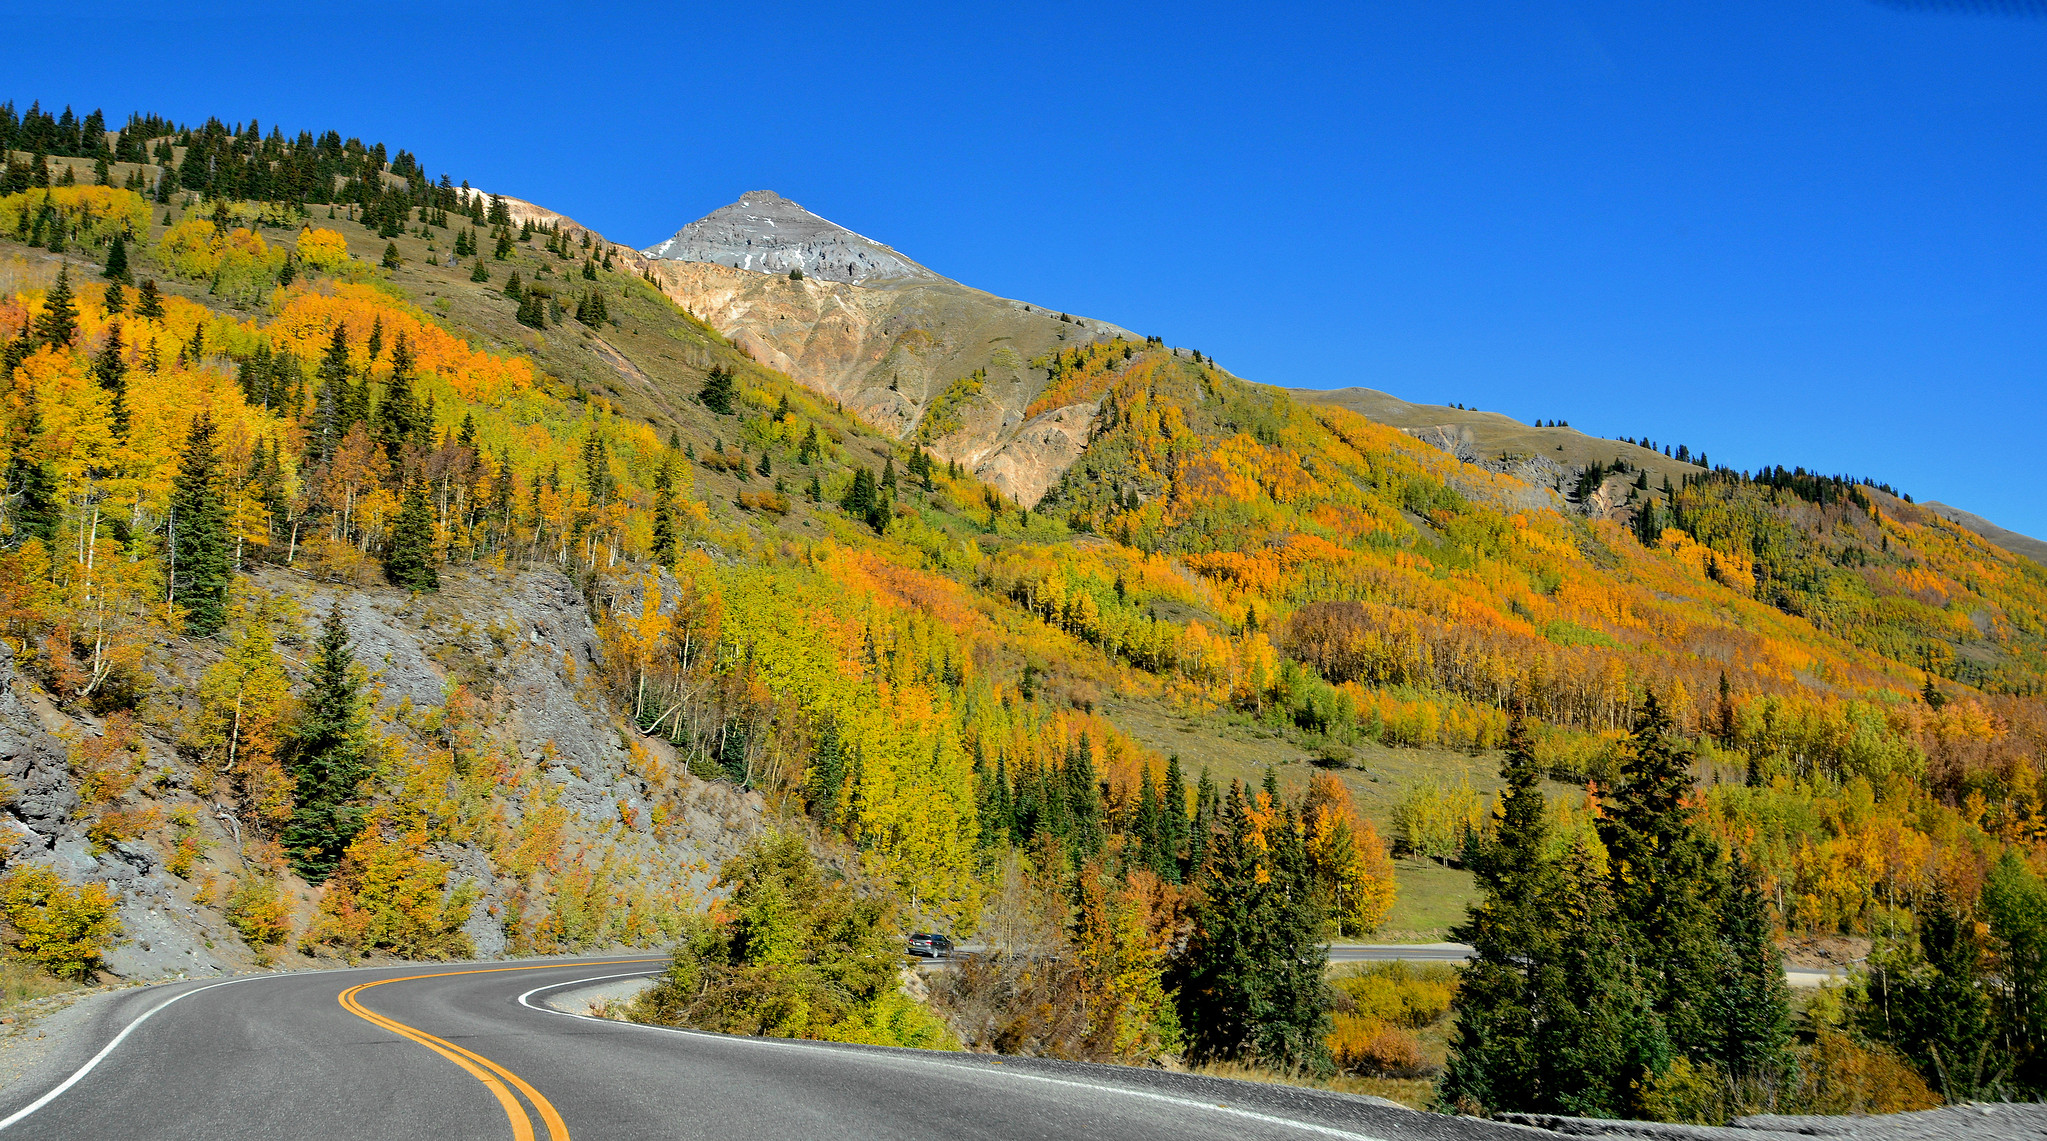 Road traveling through mountains with trees in array of fall colors